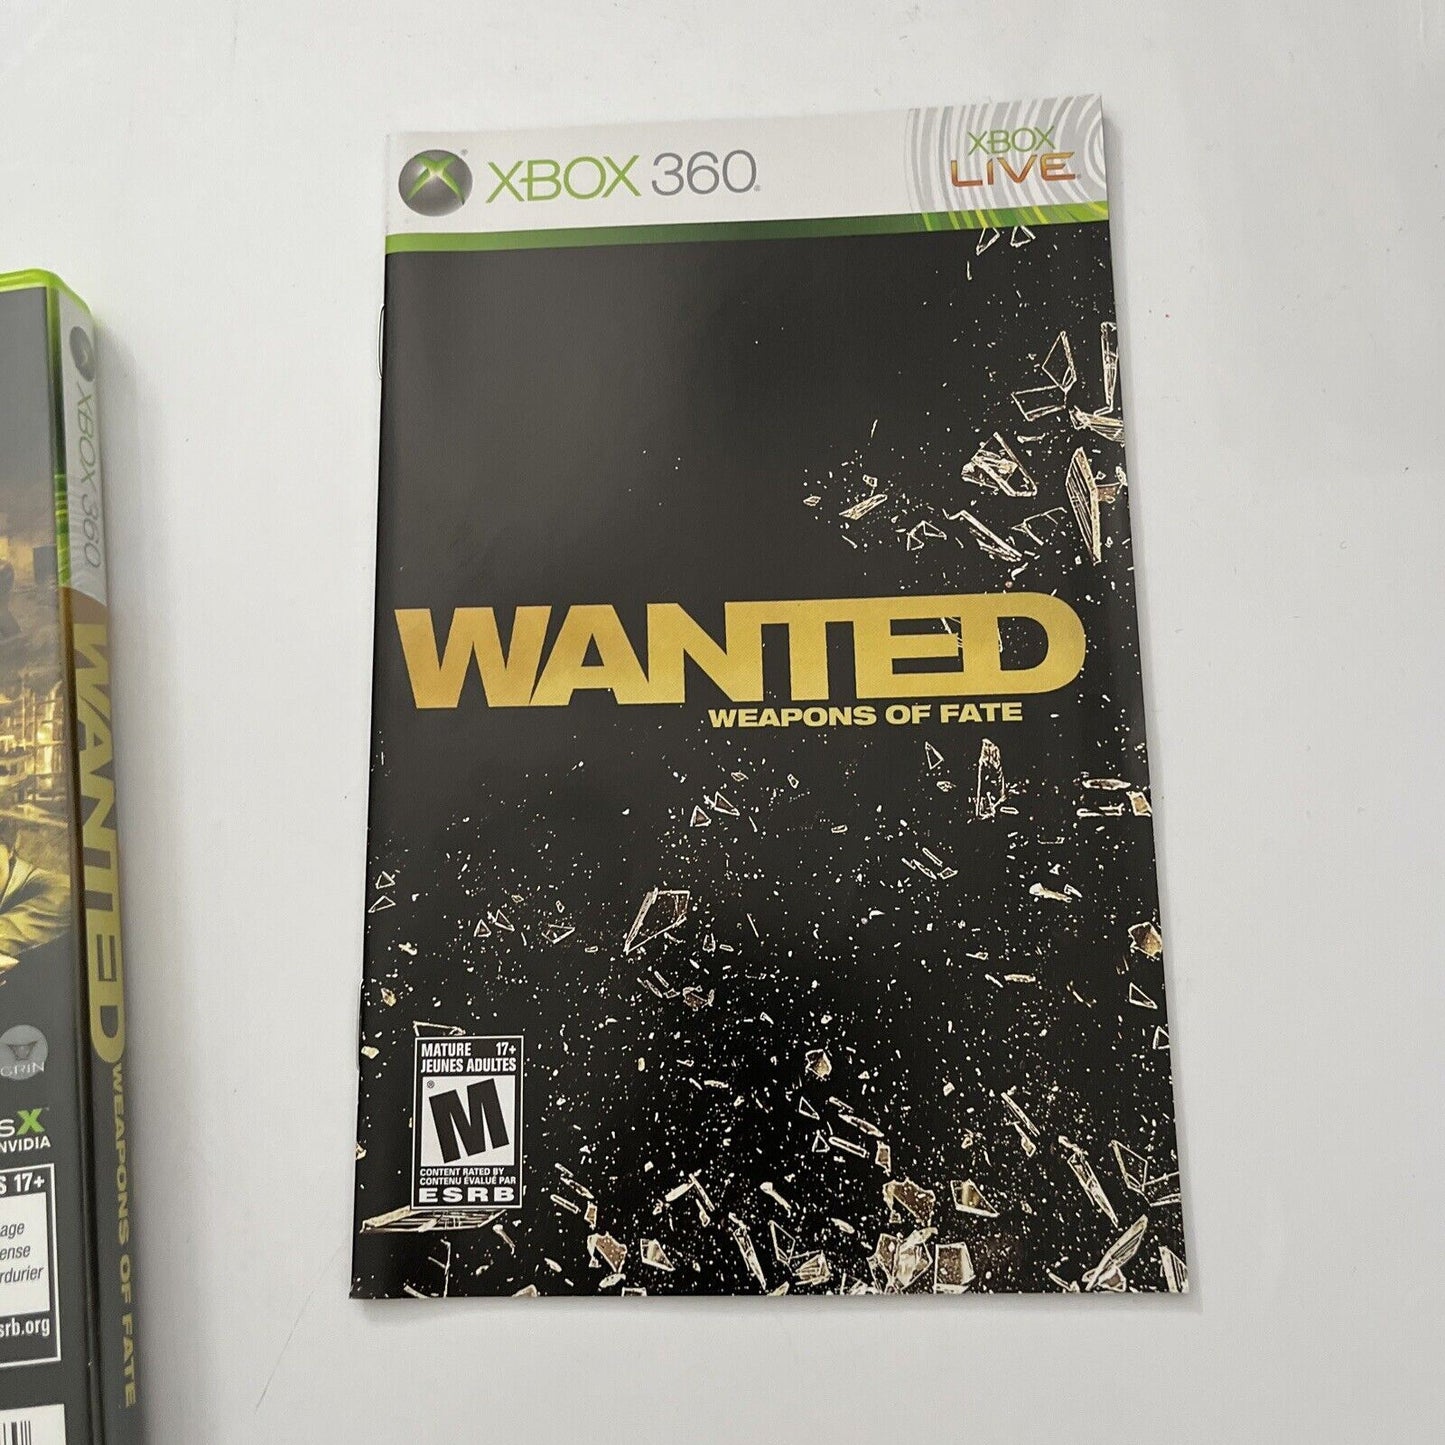 Wanted Weapons Of Fate XBOX 360 Manual PAL